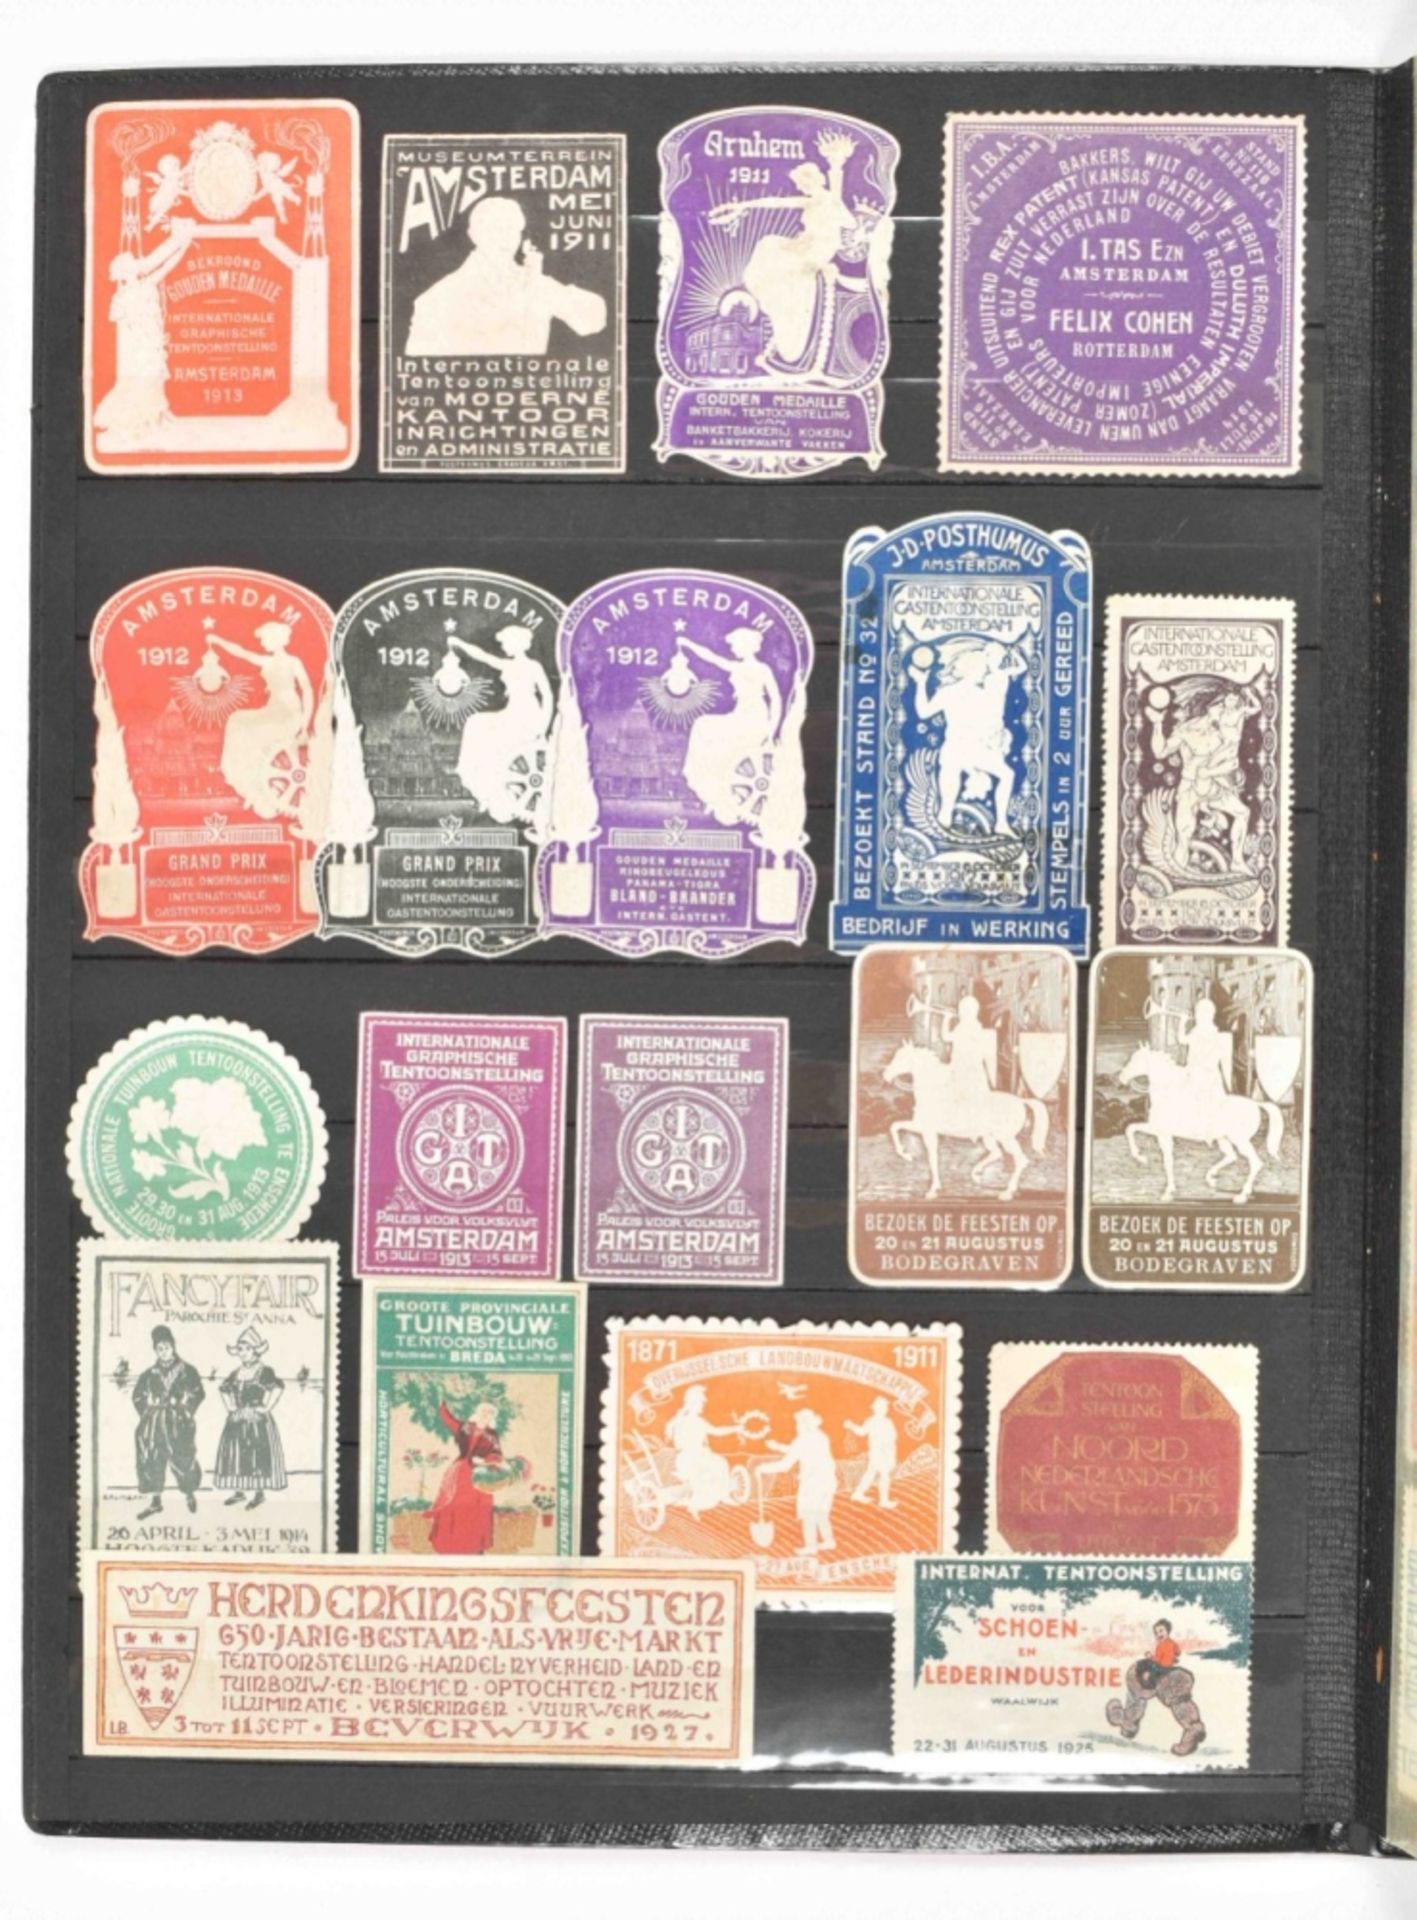 [Poster stamps] Album with approximately 600 poster stamps